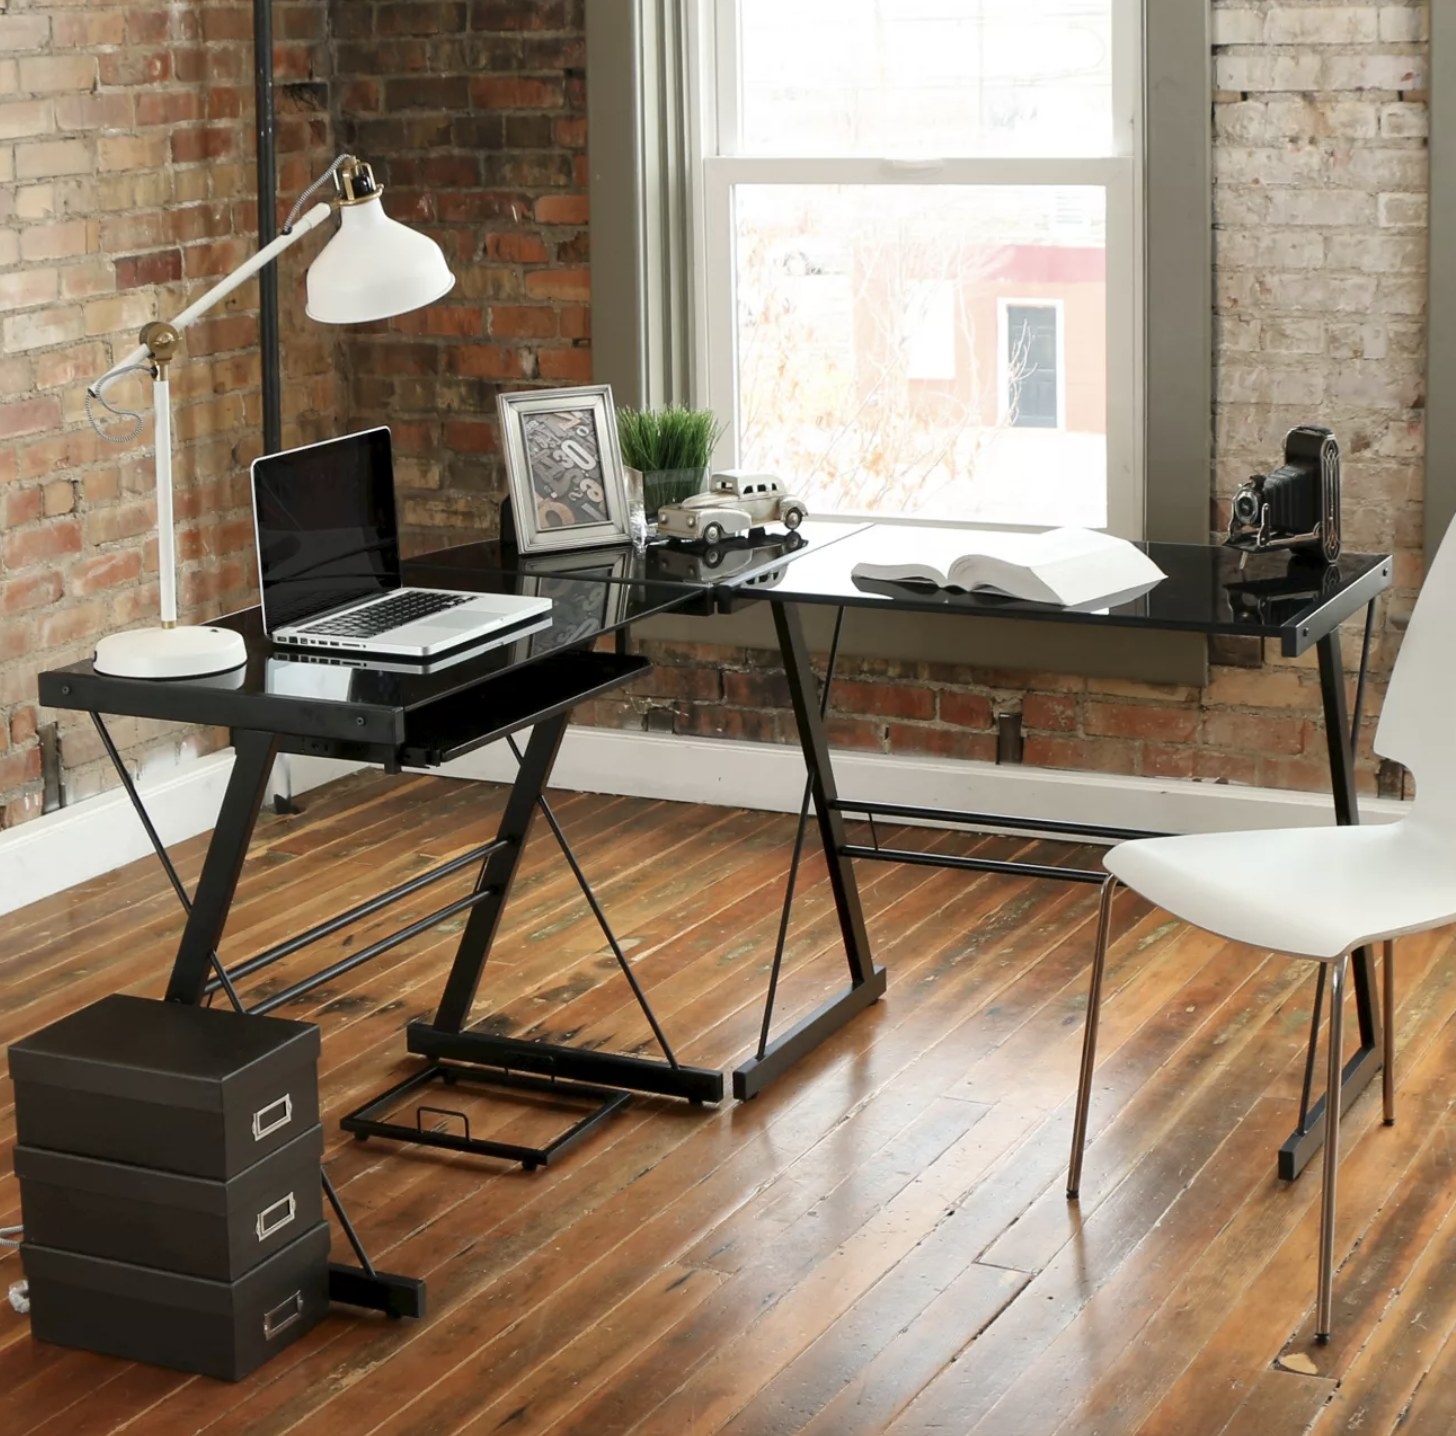 A black L-shaped computer desk in a living space